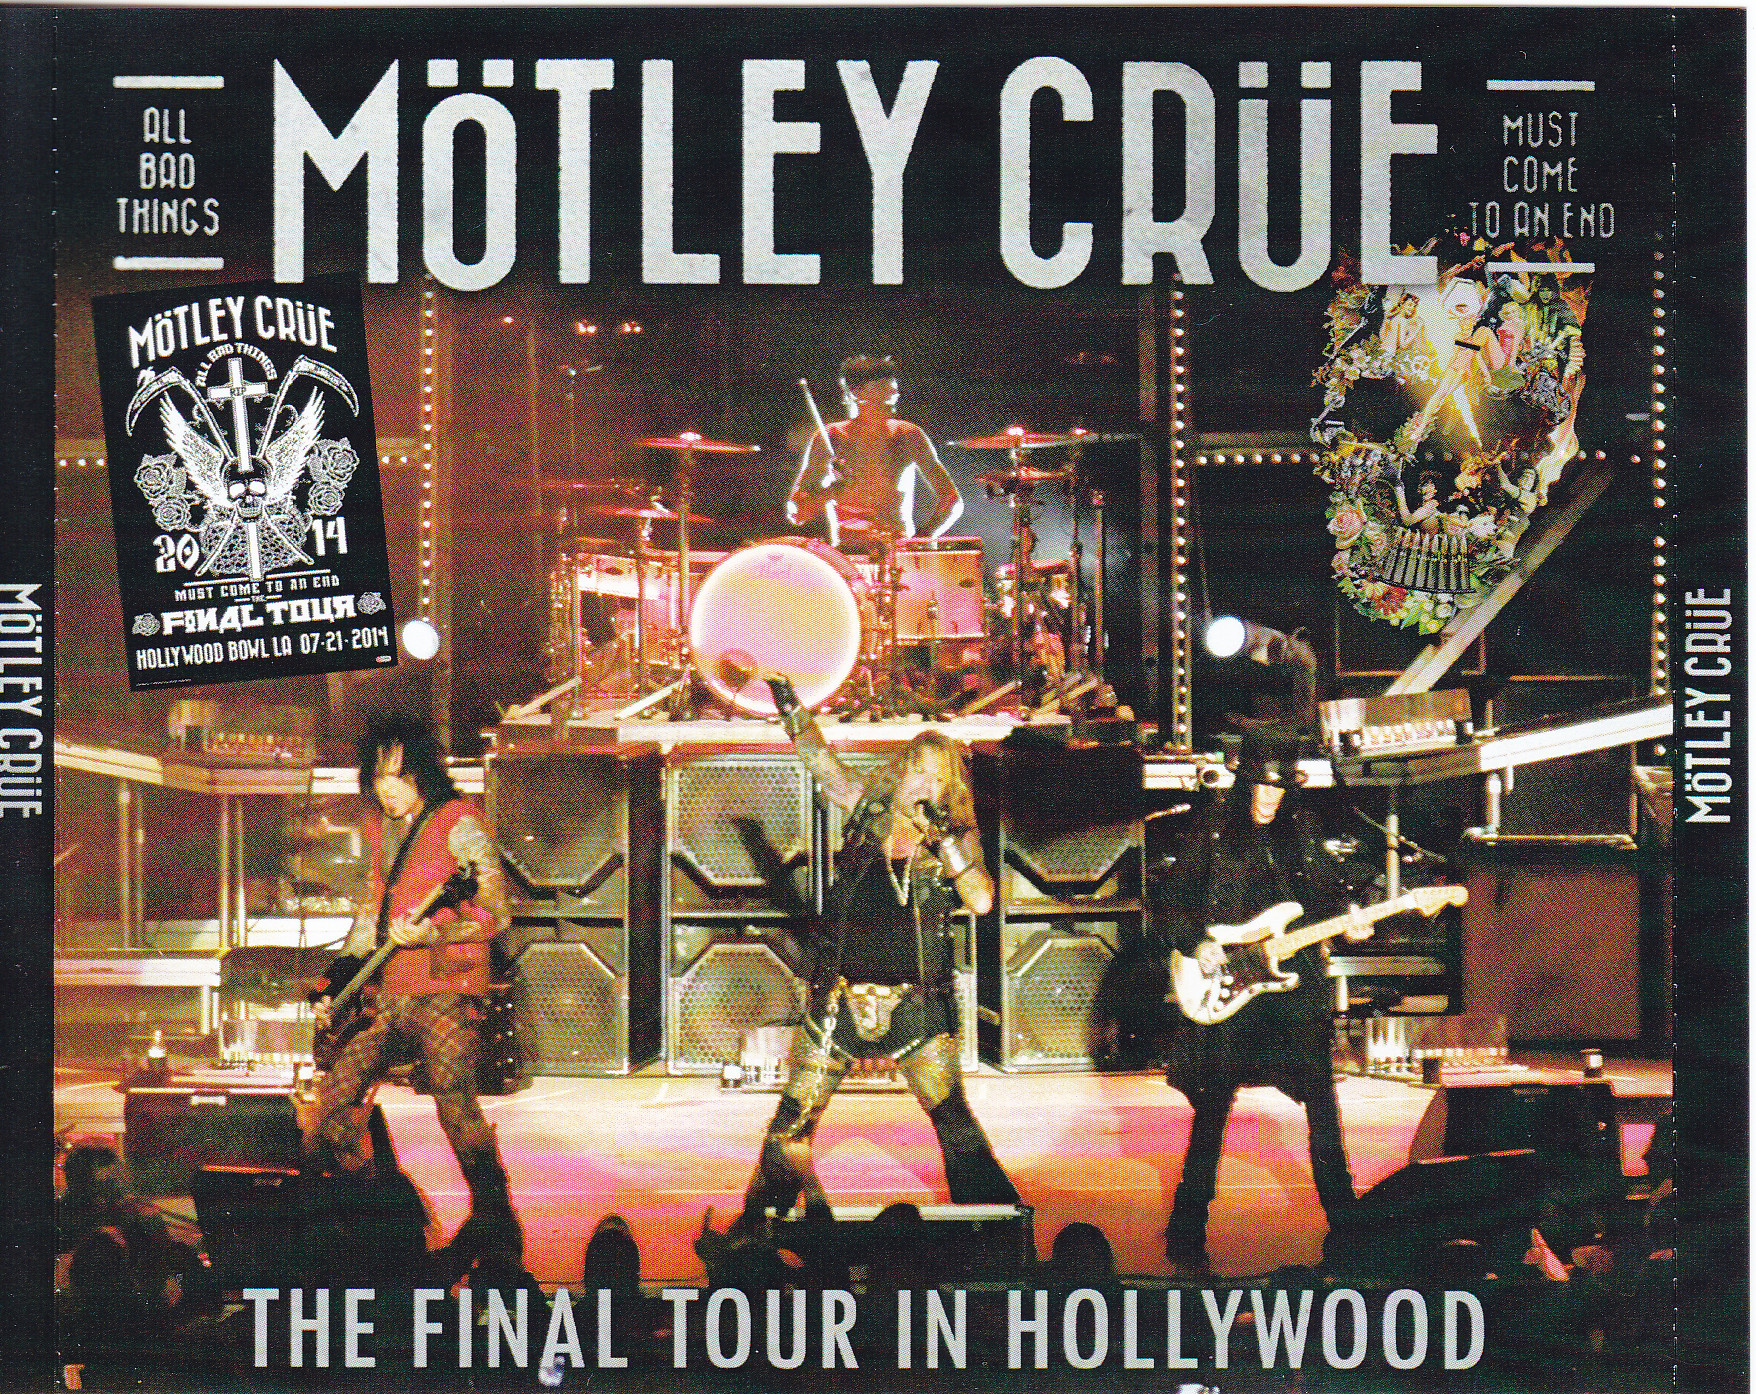 Motley Crue / The Final Tour In Hollywood / 2CDR+1DVDR – GiGinJapan